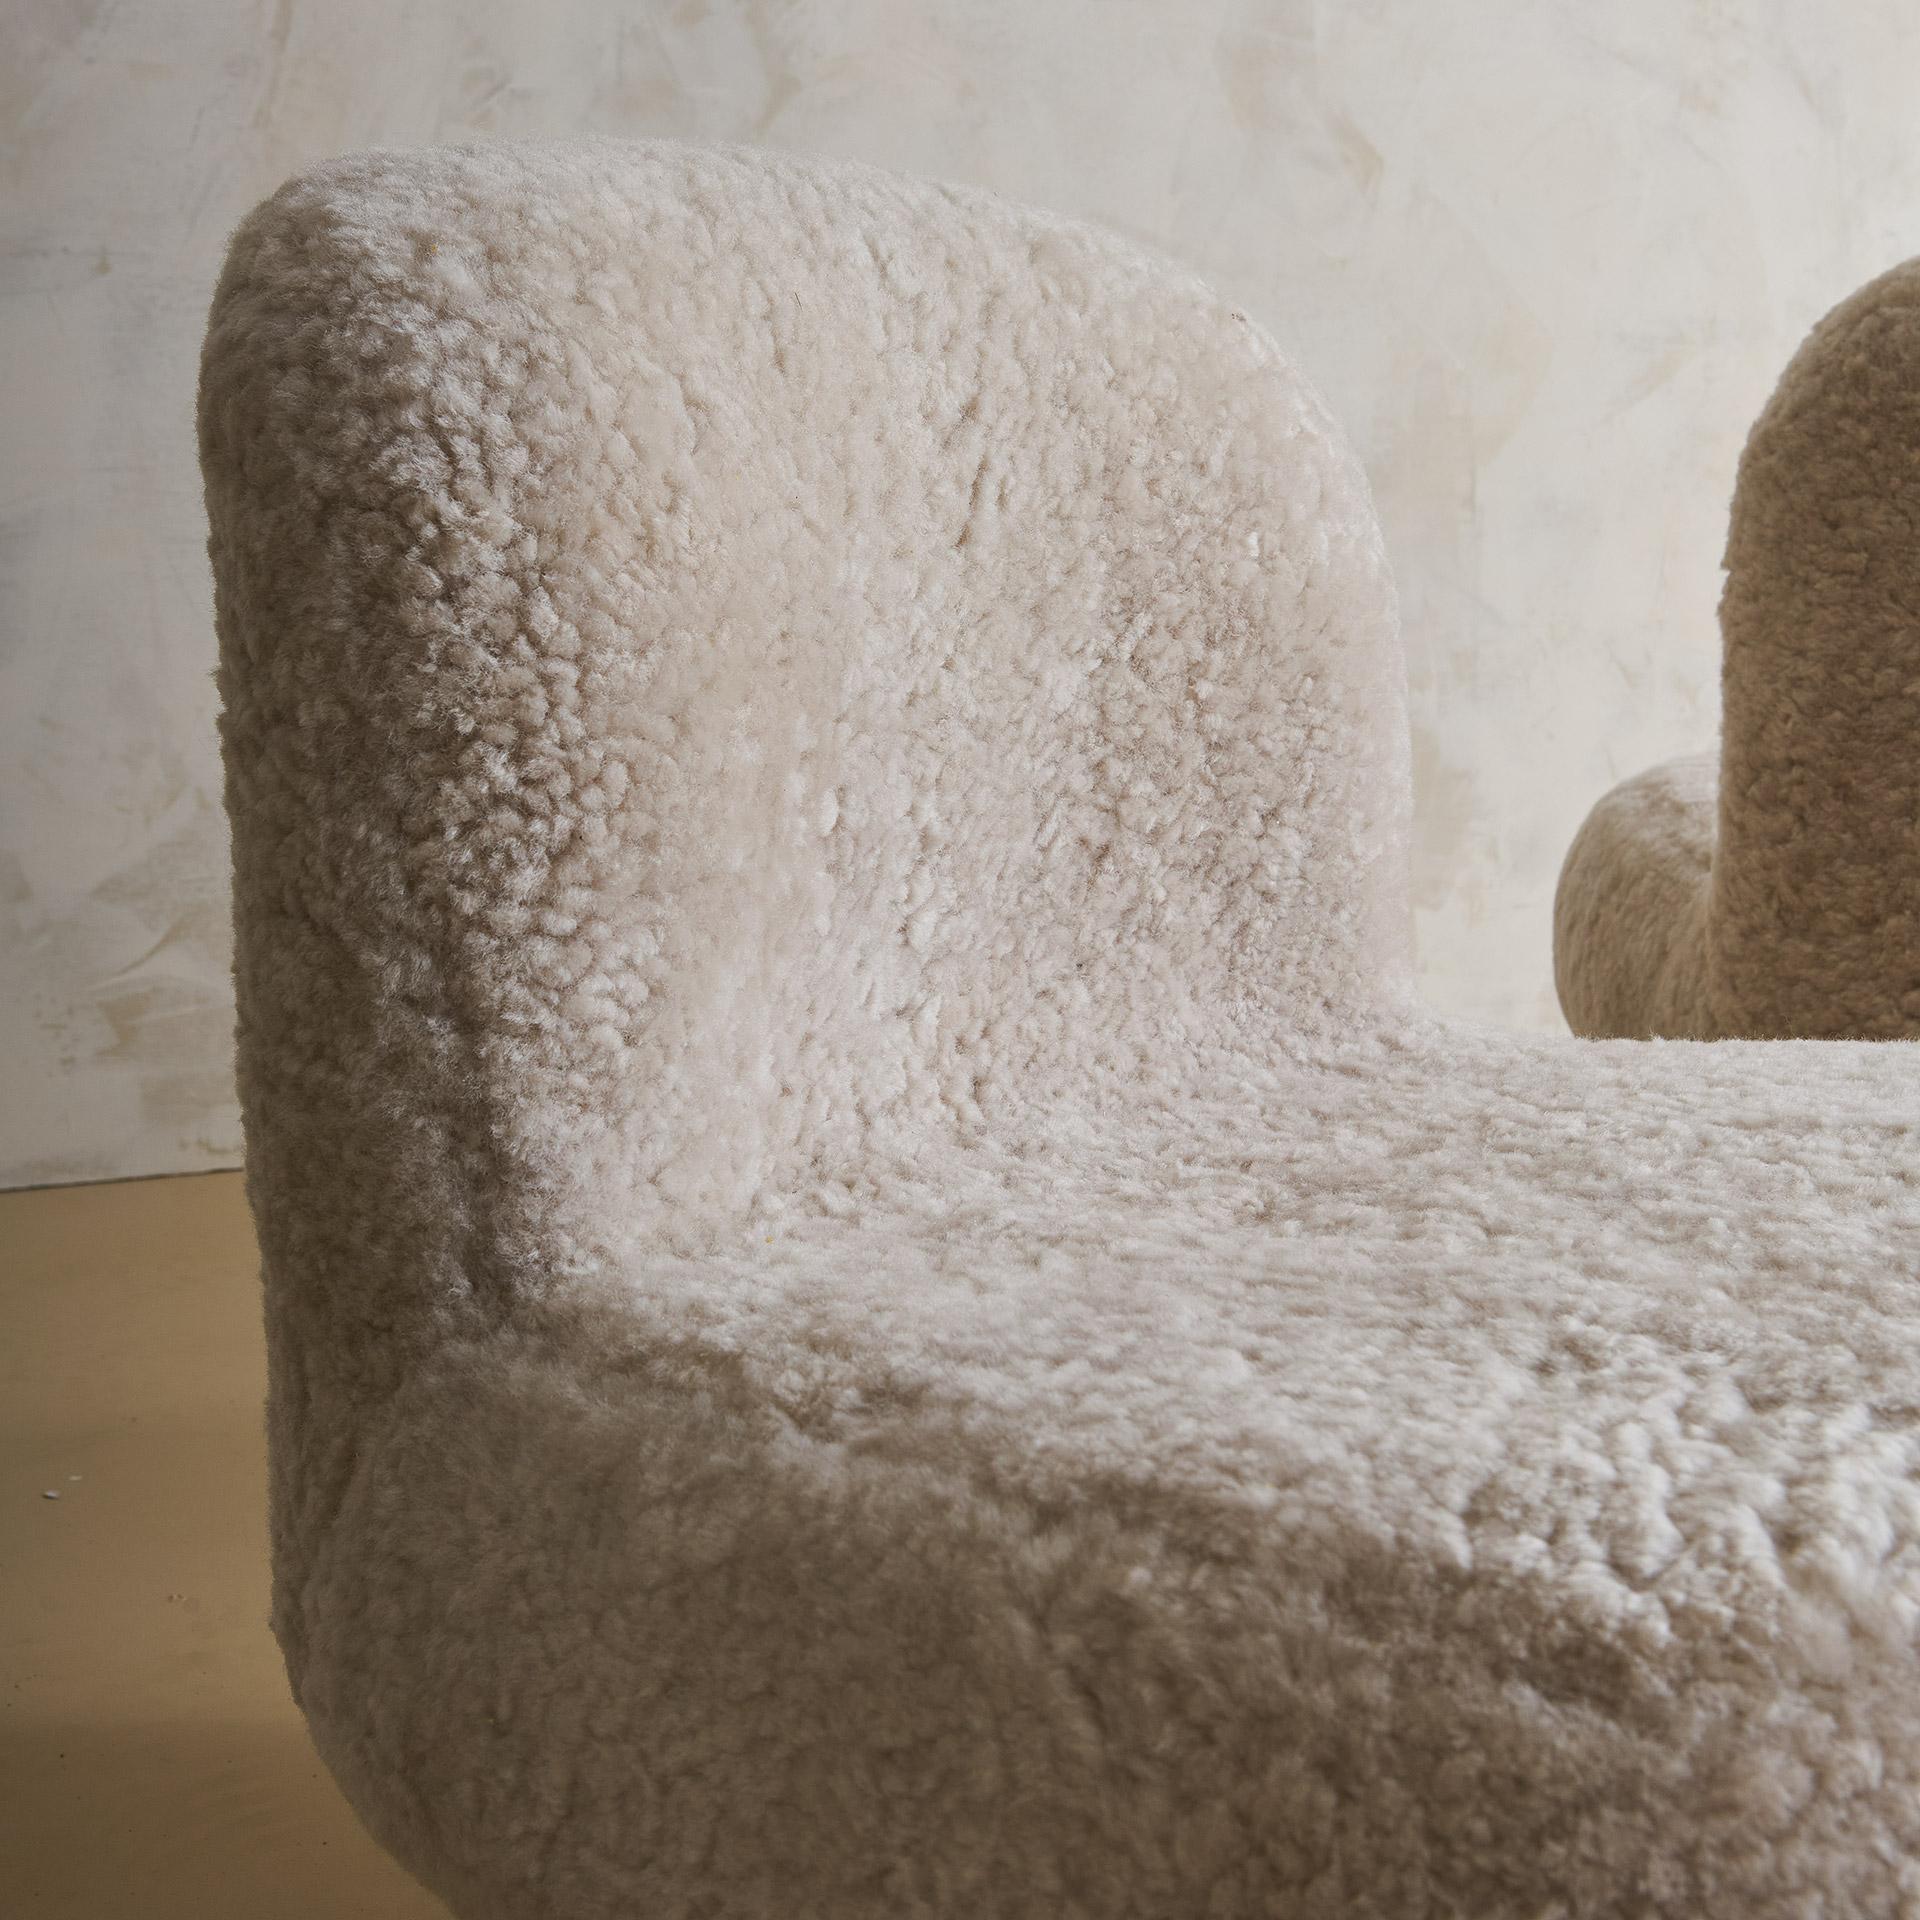 Italian Pair of Botolo Chairs by Cini Boeri for Arflex in Shearling